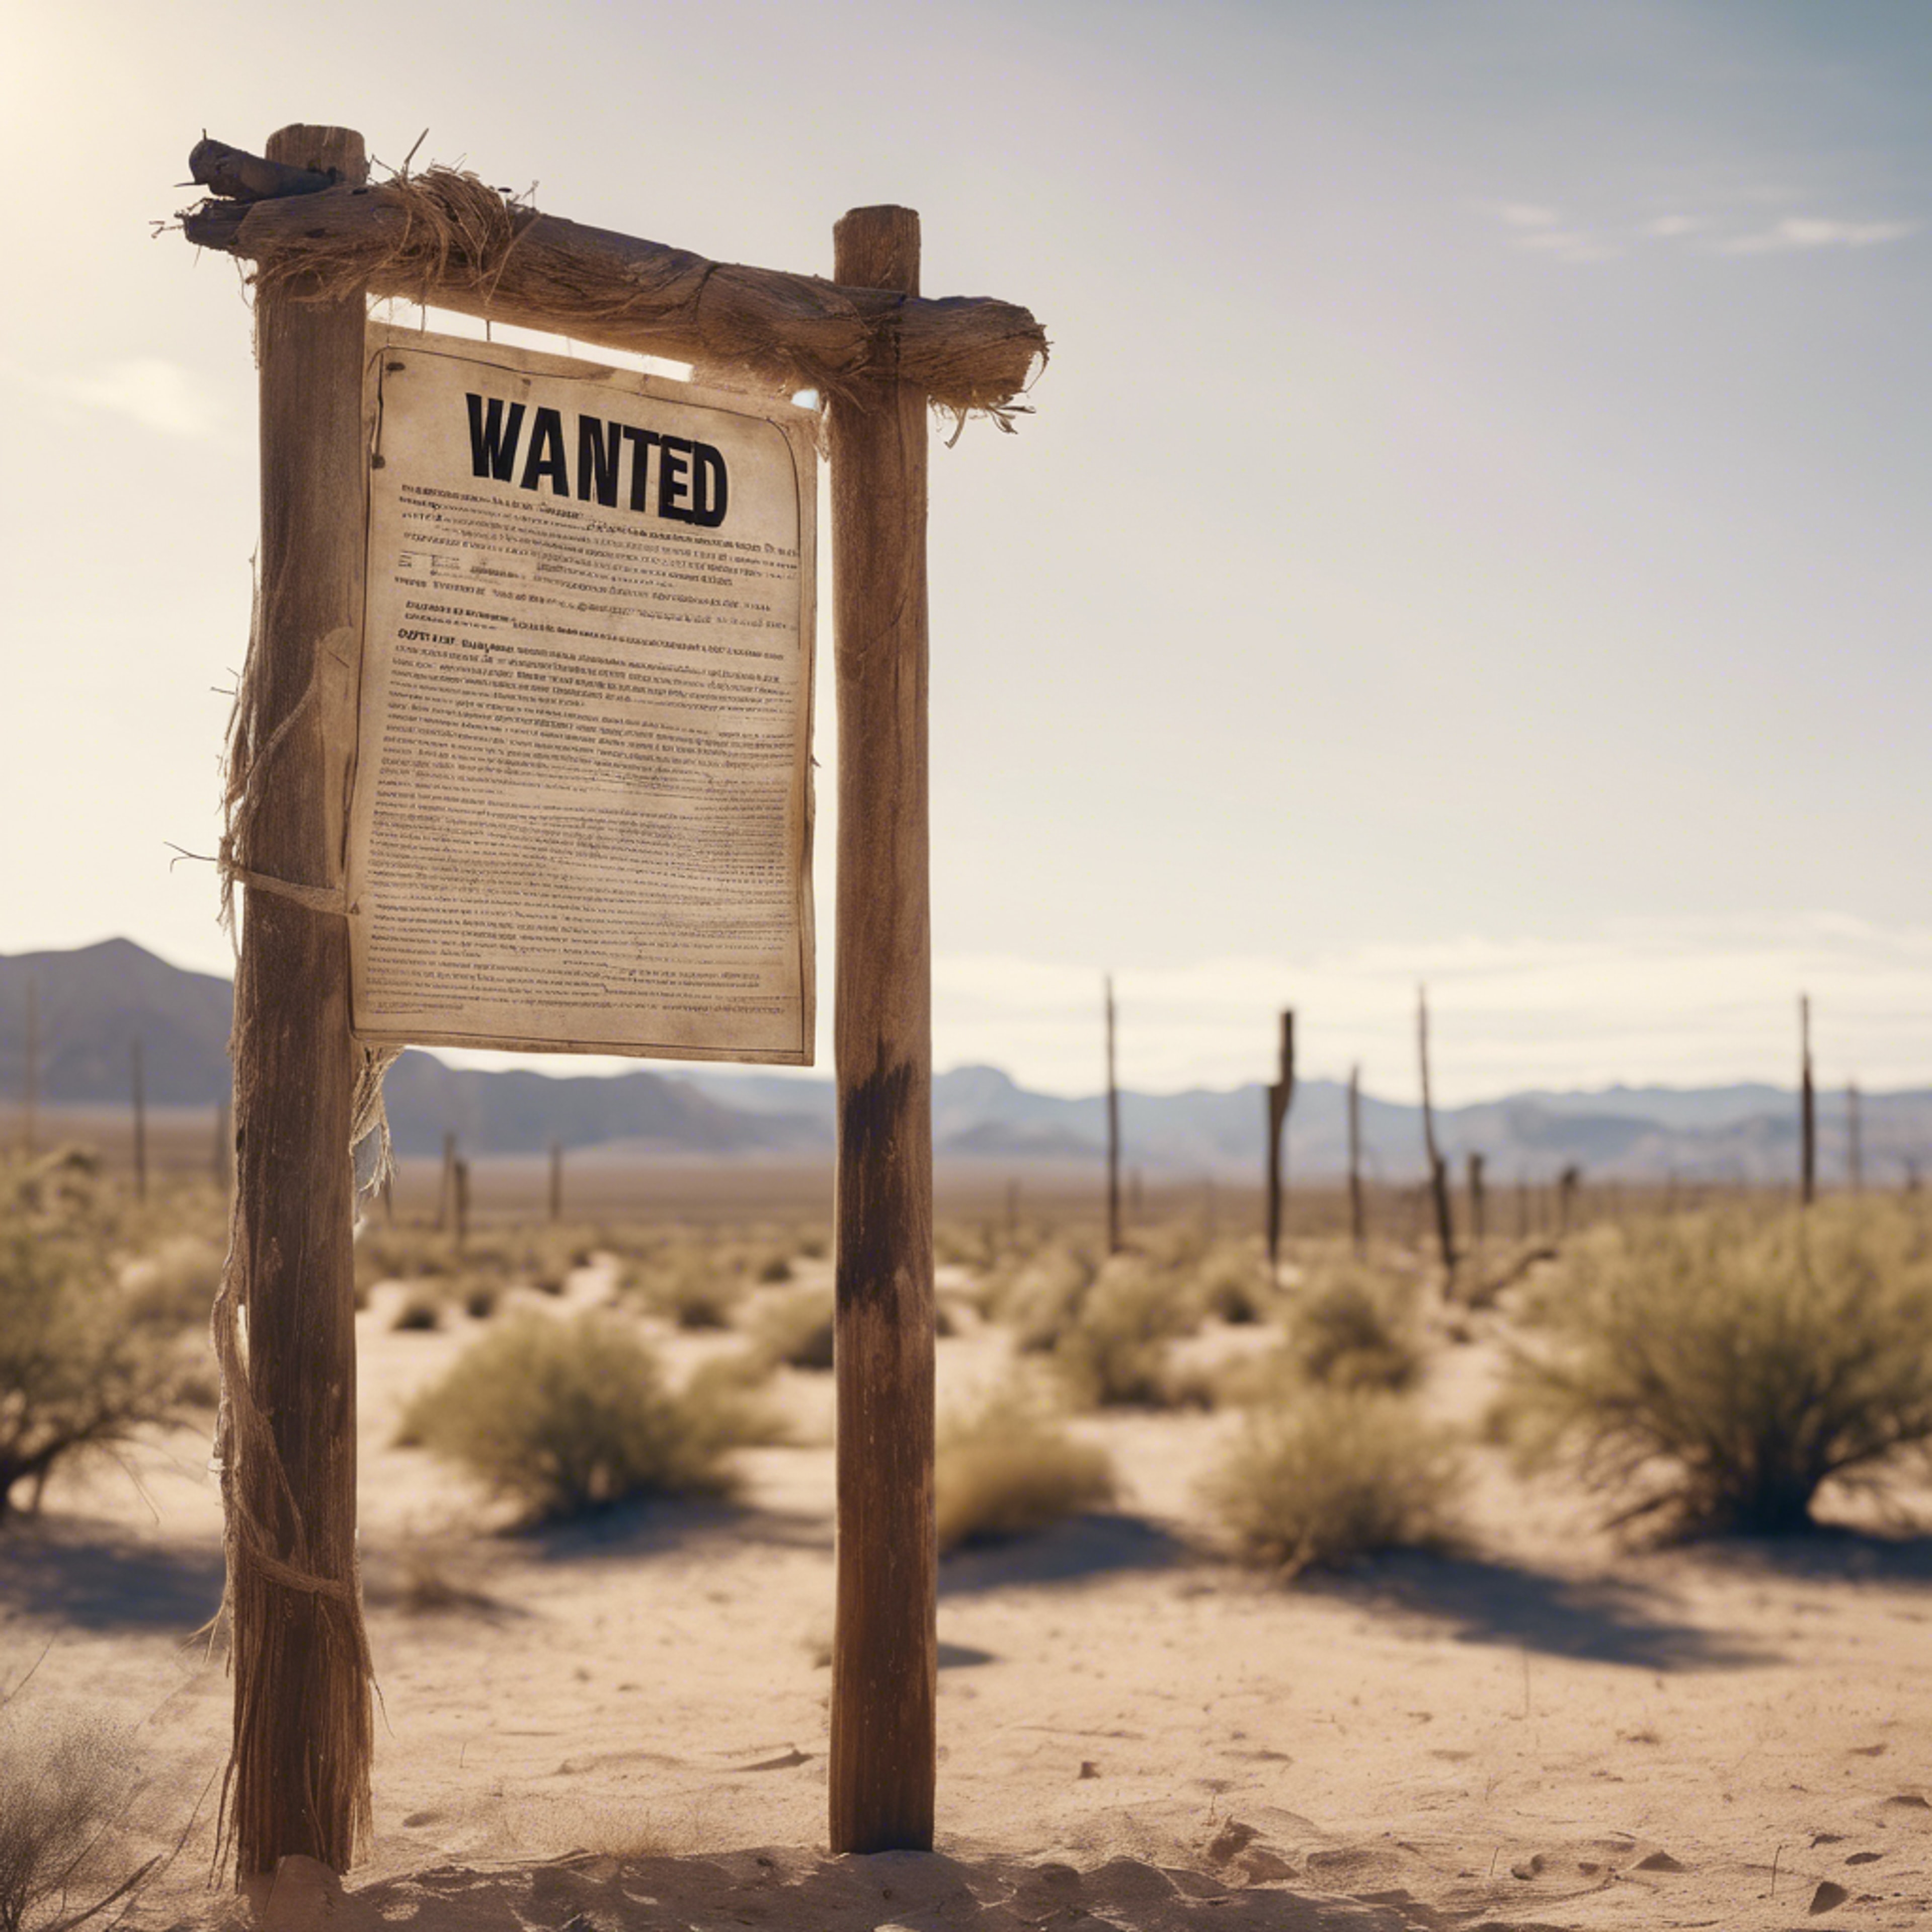 A wanted poster nailed to wooden post in a windy desert town, offering a reward in bold letters. Tapeta[1e032392f4784d5094da]